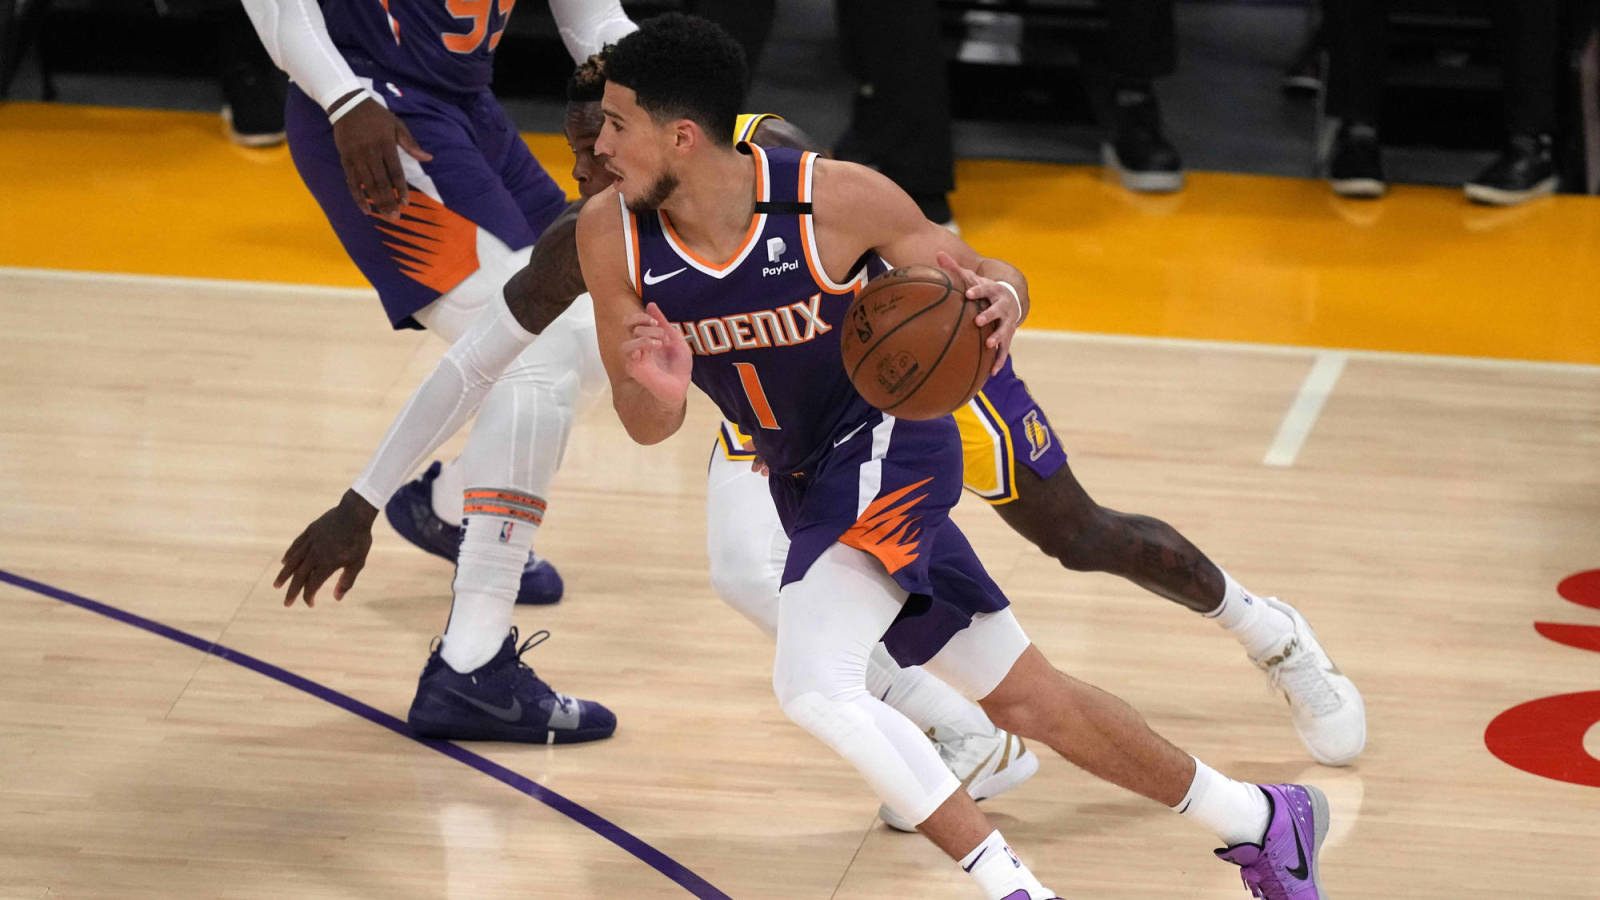 Devin Booker answered everyone against the Lakers in Game 6